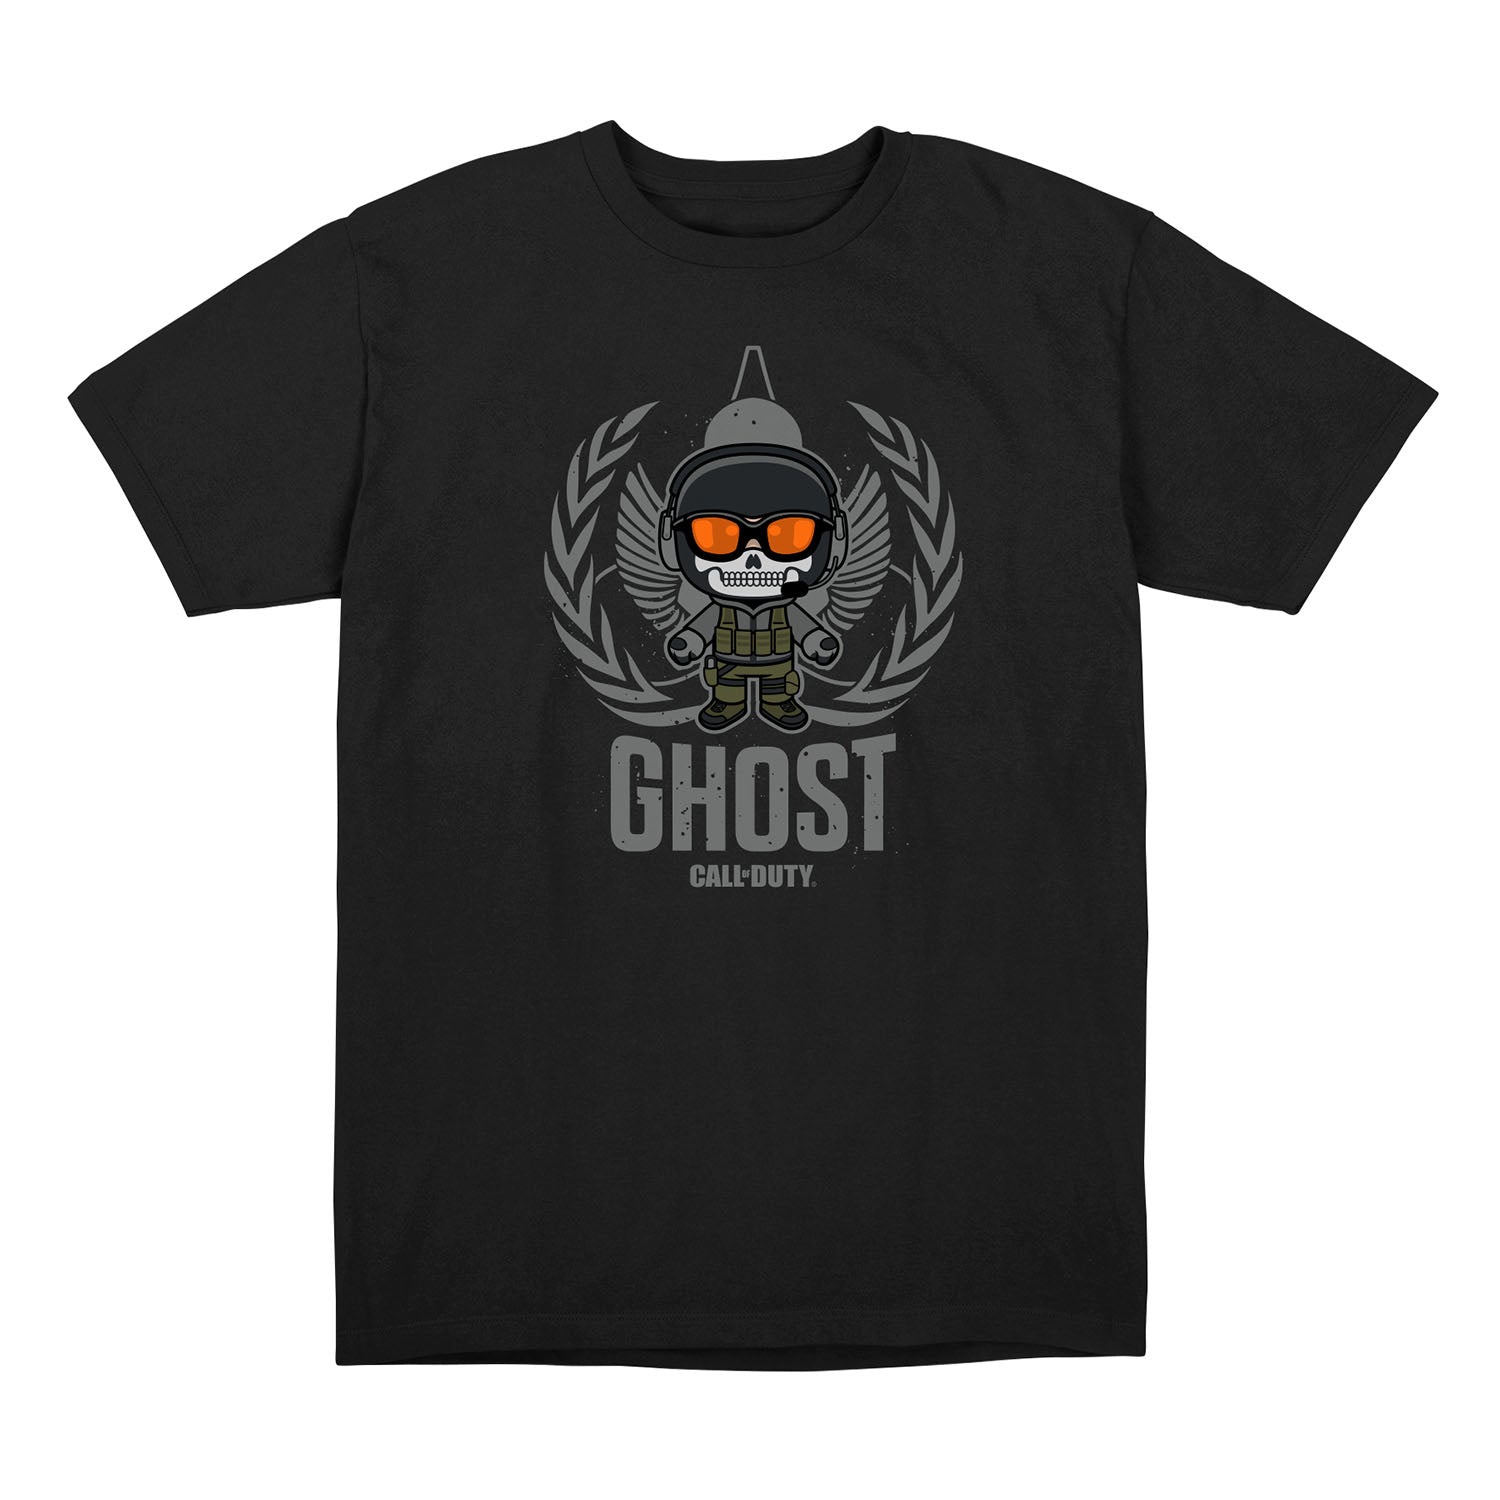 Call of Duty Chibi Ghost Black T-Shirt - Front View